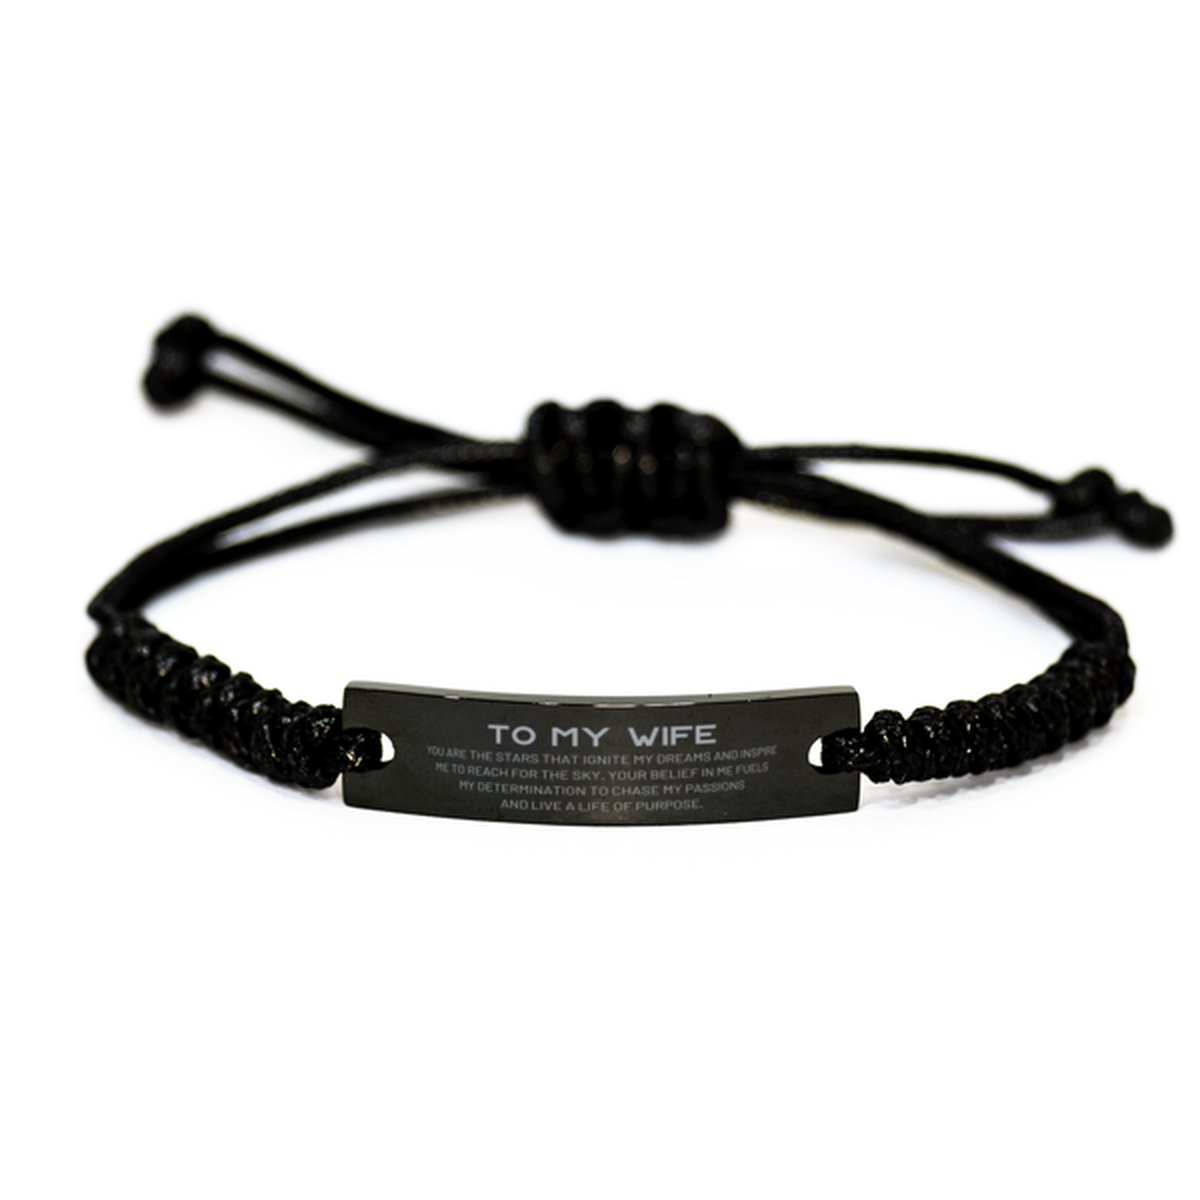 To My Wife Black Rope Bracelet, You are the stars that ignite my dreams and inspire me to reach for the sky, Birthday Unique Gifts For Wife, Thank You Gifts For Wife